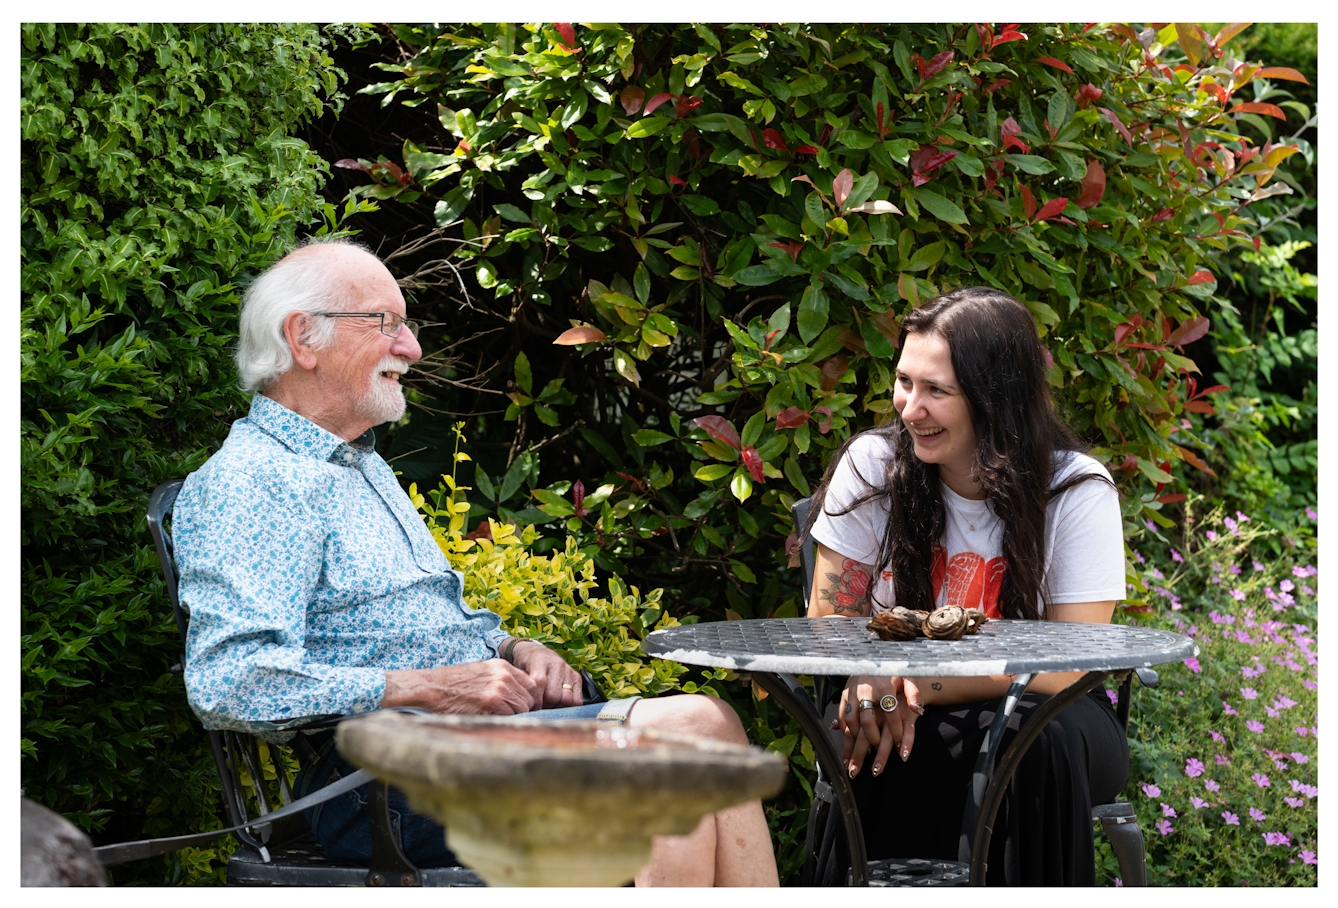 A photograph of two people smiling and laughing with each other in a garden. On the left is an elderly man wearing glasses with white hair and a white goatee beard. He is wearing a shirt covered with small blue flowers. On the right is a young woman with long dark hair. She is wearing a white t-shirt with a red printed design on the front, there are tattoos visible on each arm. Behind both people are large bushes with variegated leaves. 